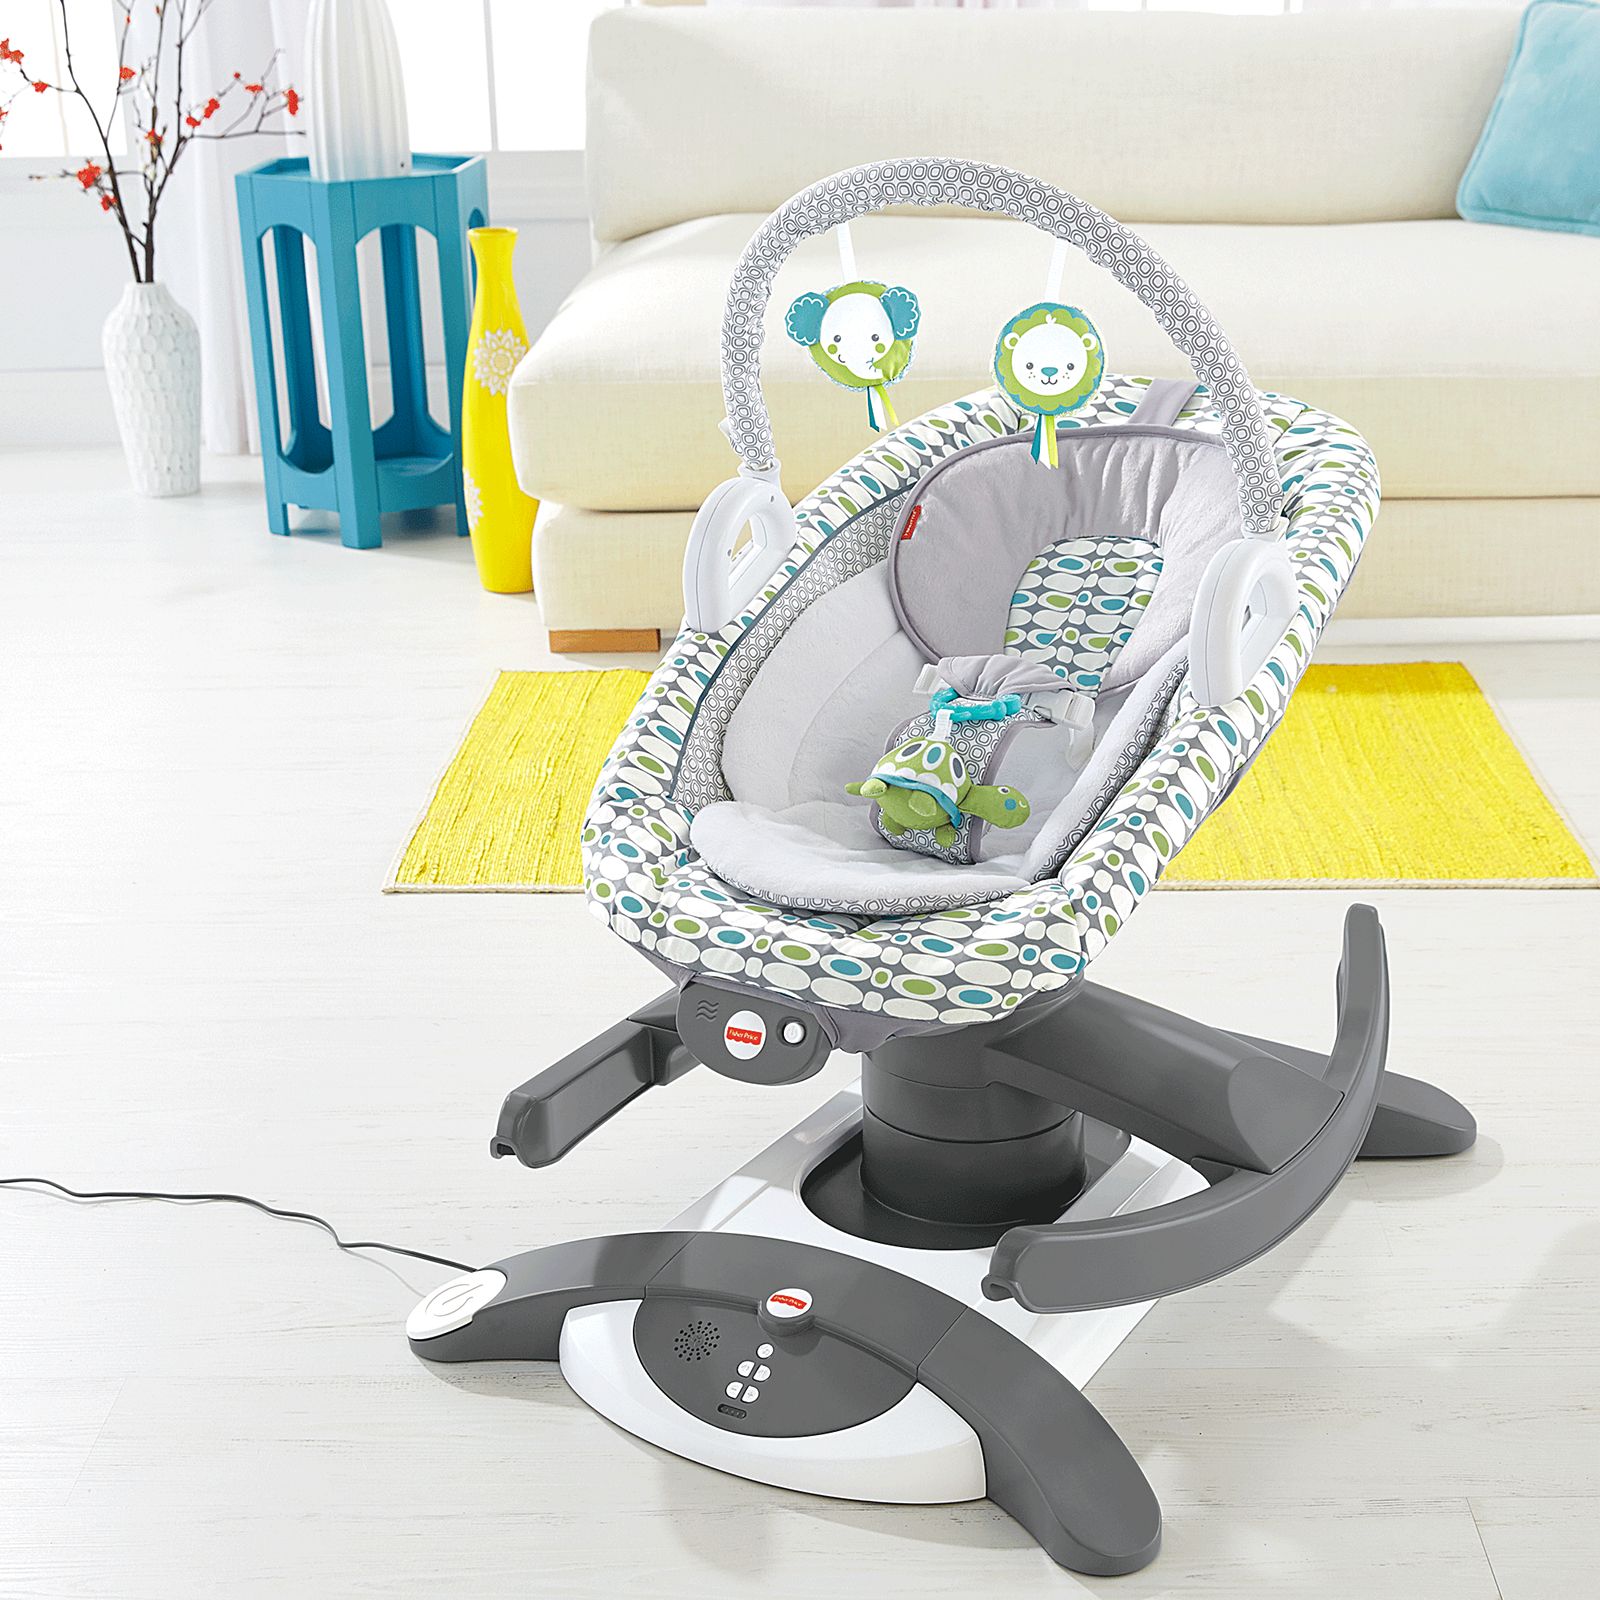 fisher price 4 in 1 rock and glide